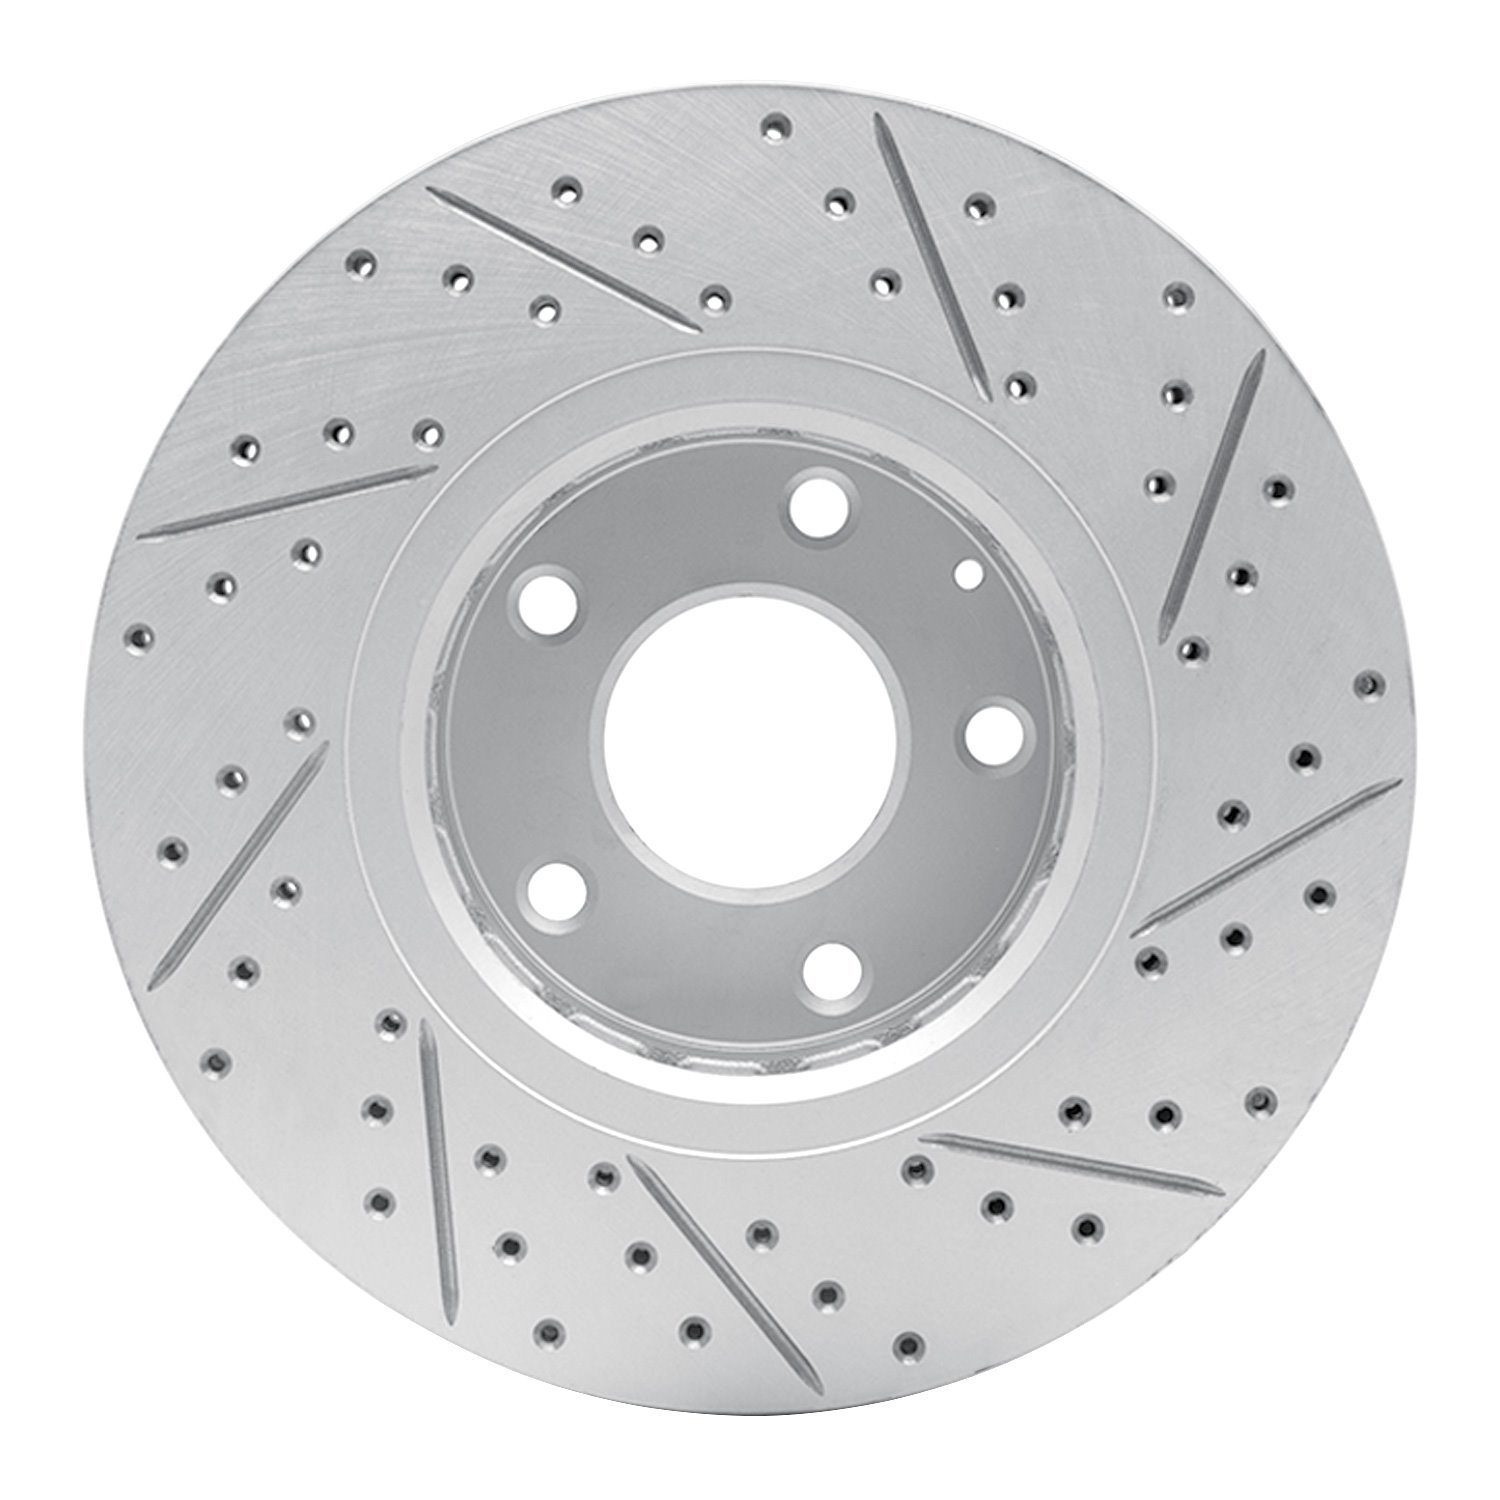 830-80076L Geoperformance Drilled/Slotted Brake Rotor, Fits Select Ford/Lincoln/Mercury/Mazda, Position: Front Left